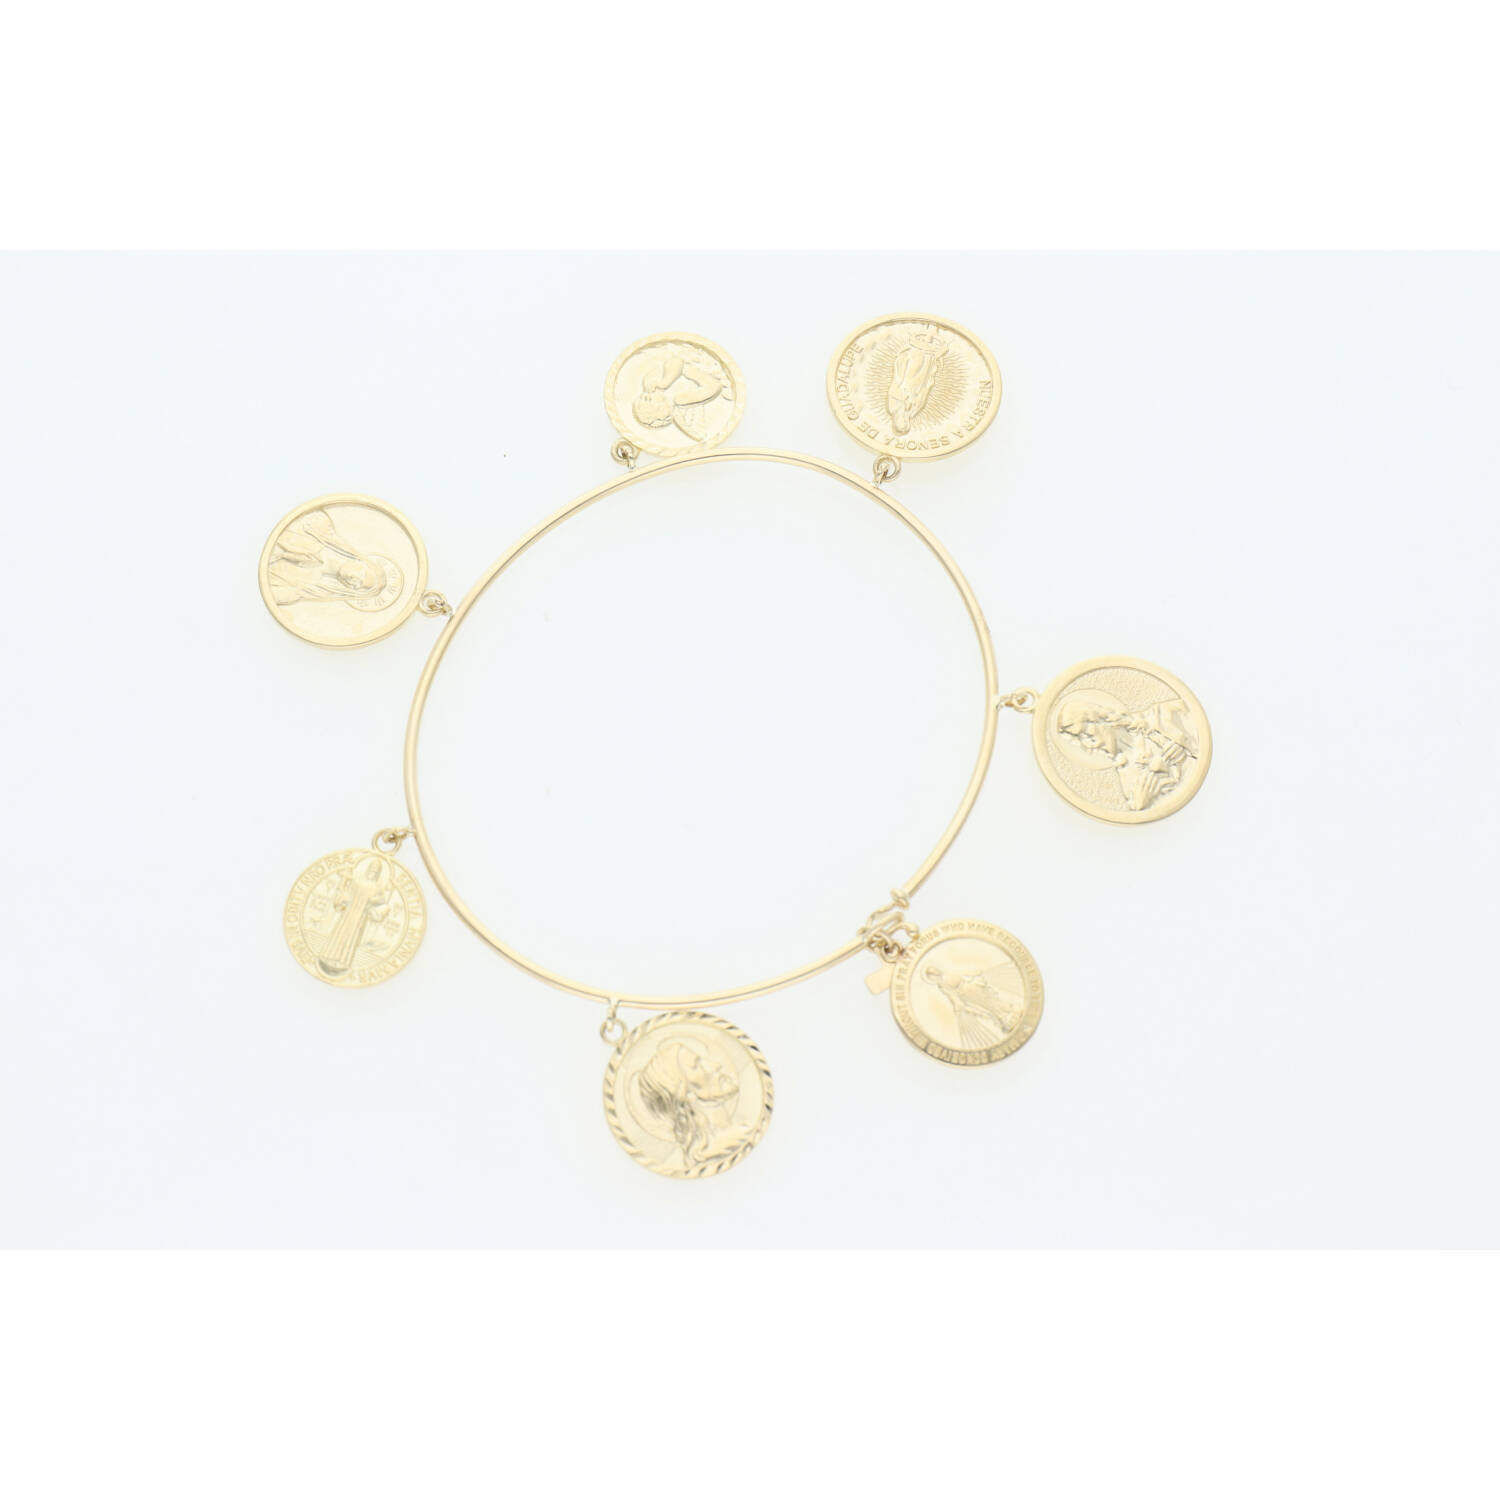 10 Karat Gold Religious Bangle With Charm 1.2mm 7.5